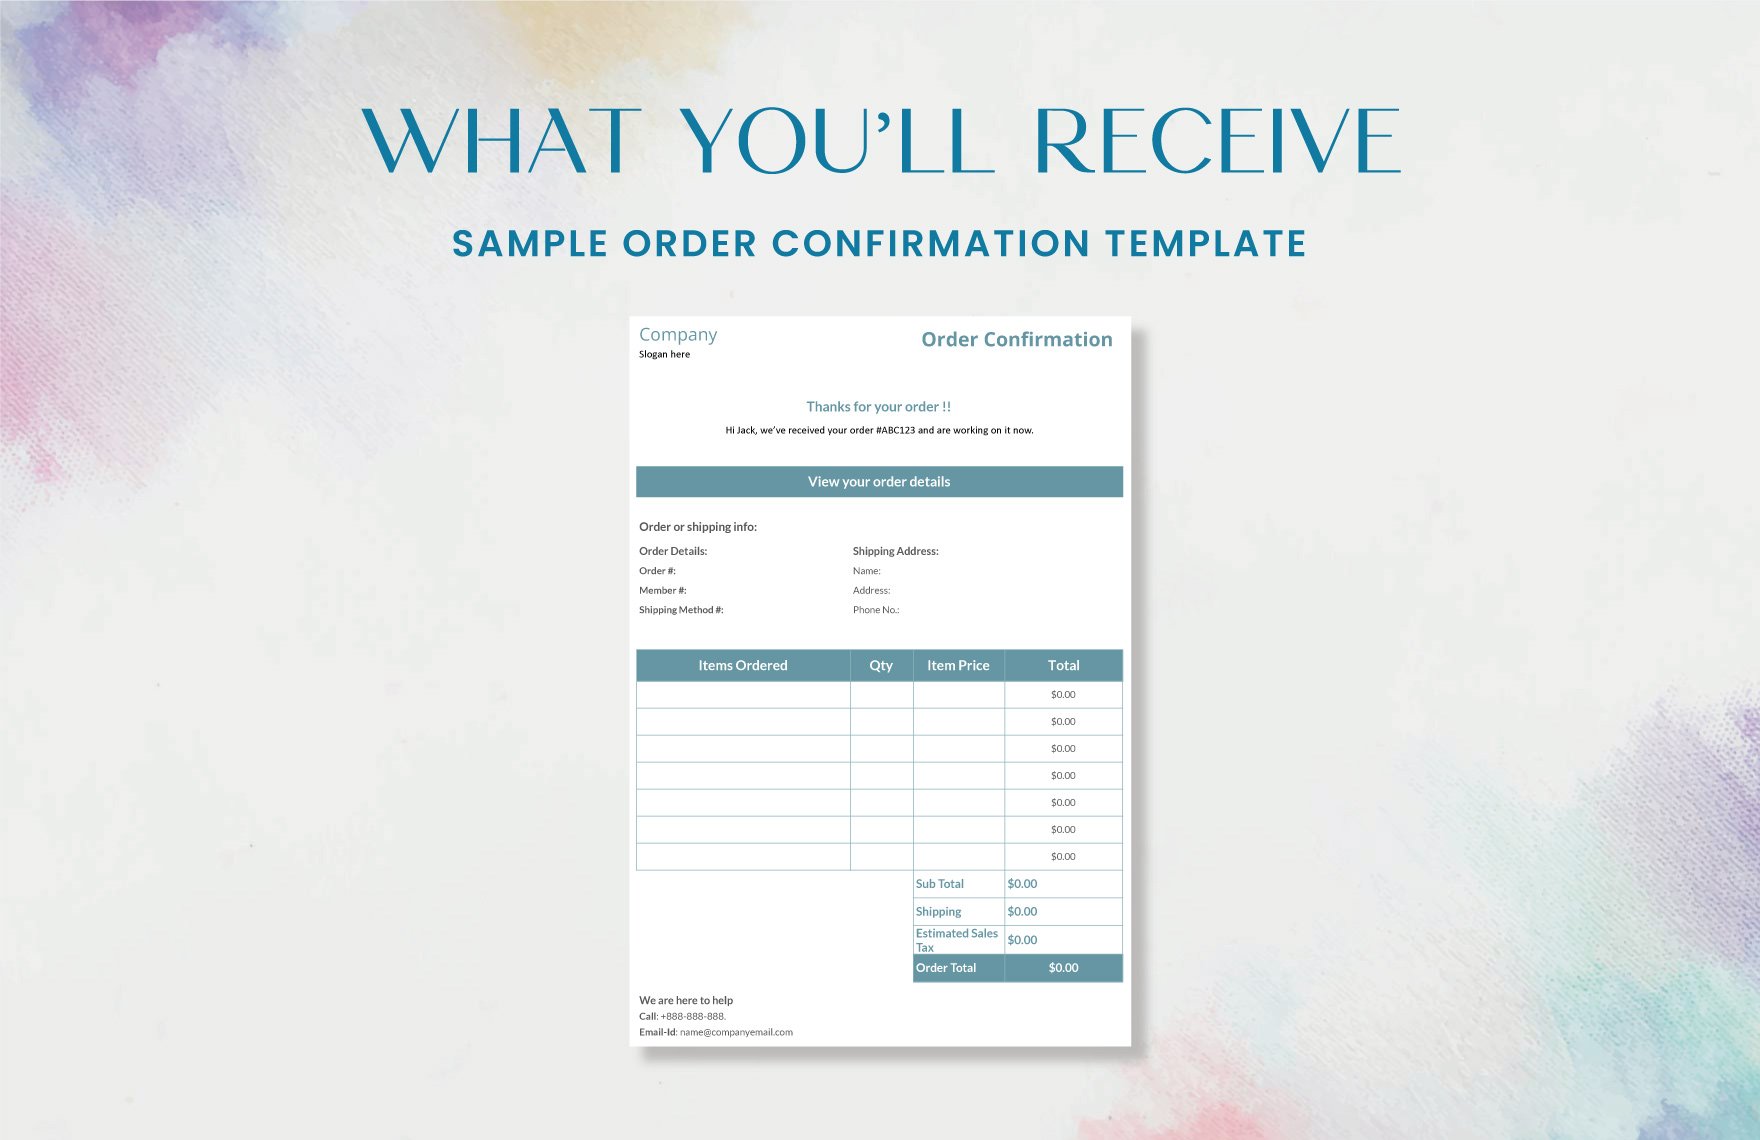 Sample Order Confirmation Template